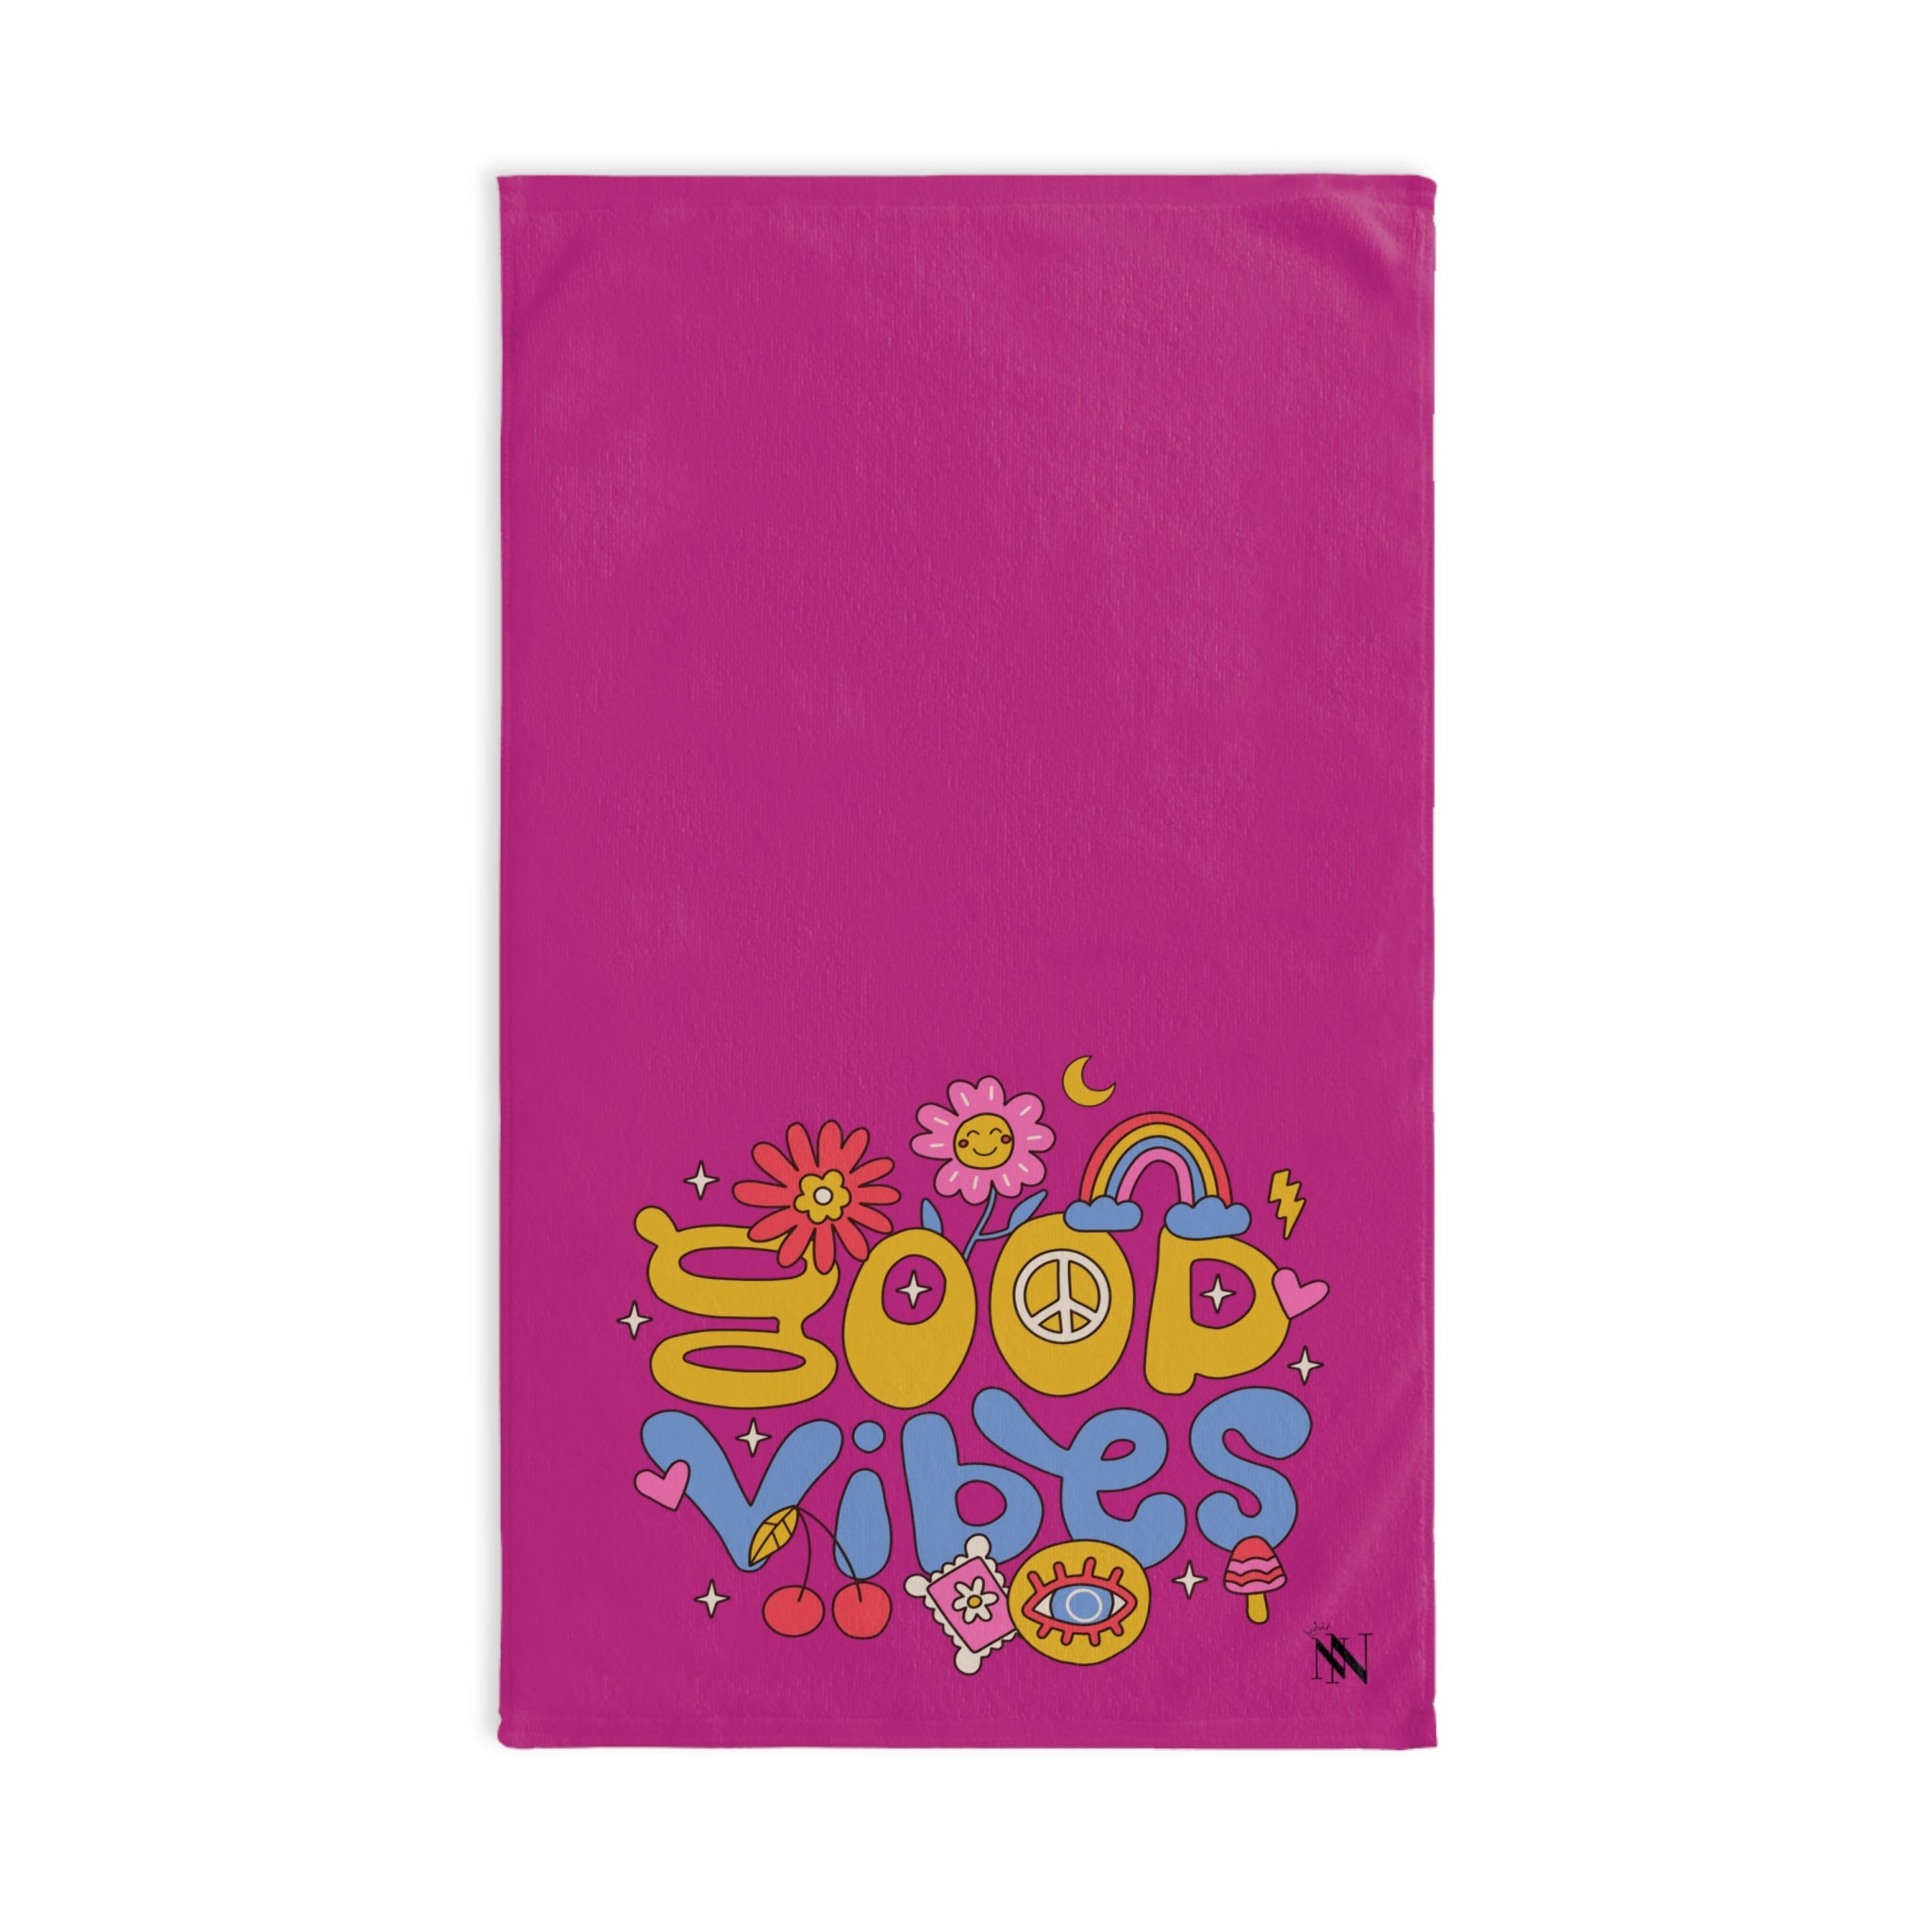 Hippie Vibes Good Fuscia | Funny Gifts for Men - Gifts for Him - Birthday Gifts for Men, Him, Husband, Boyfriend, New Couple Gifts, Fathers & Valentines Day Gifts, Hand Towels NECTAR NAPKINS